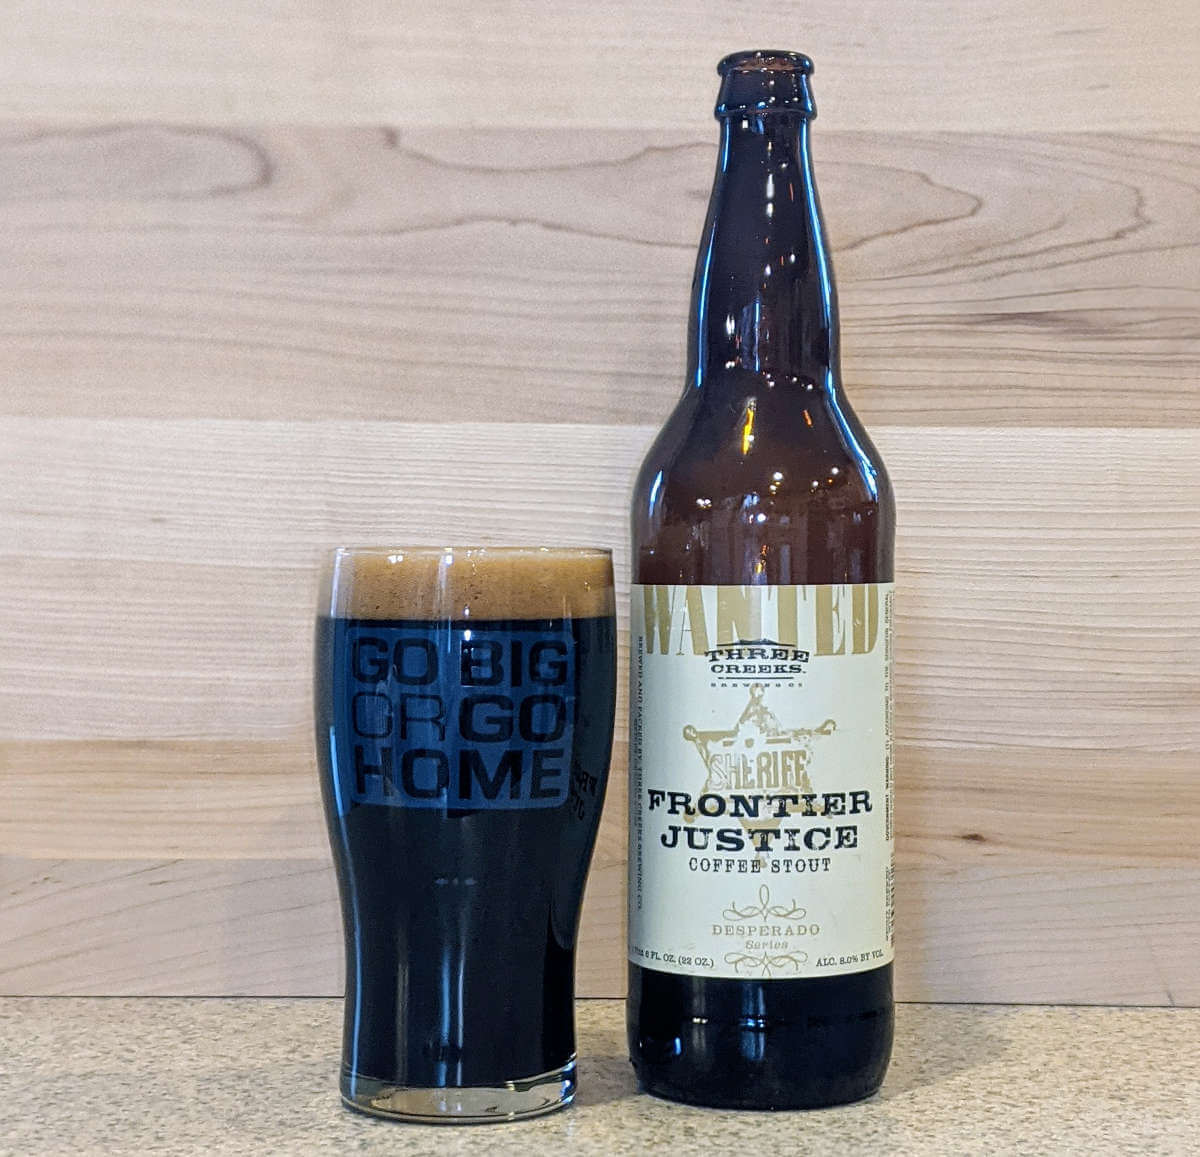 Latest print article: Frontier Justice Coffee Stout from Three Creeks Brewing (plus bonus review)